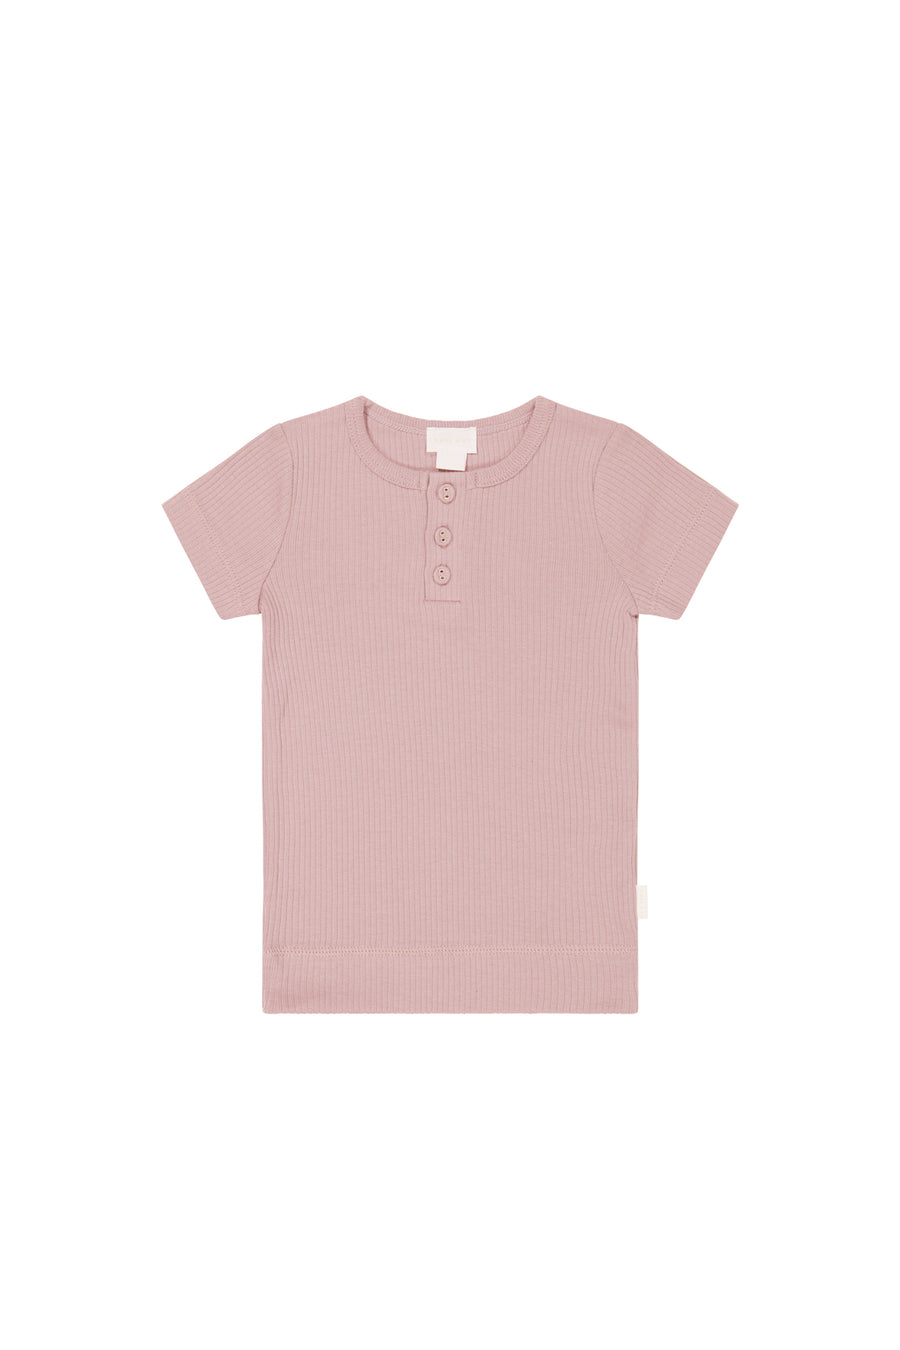 Organic Cotton Modal Henley Tee - Doll Childrens Top from Jamie Kay NZ